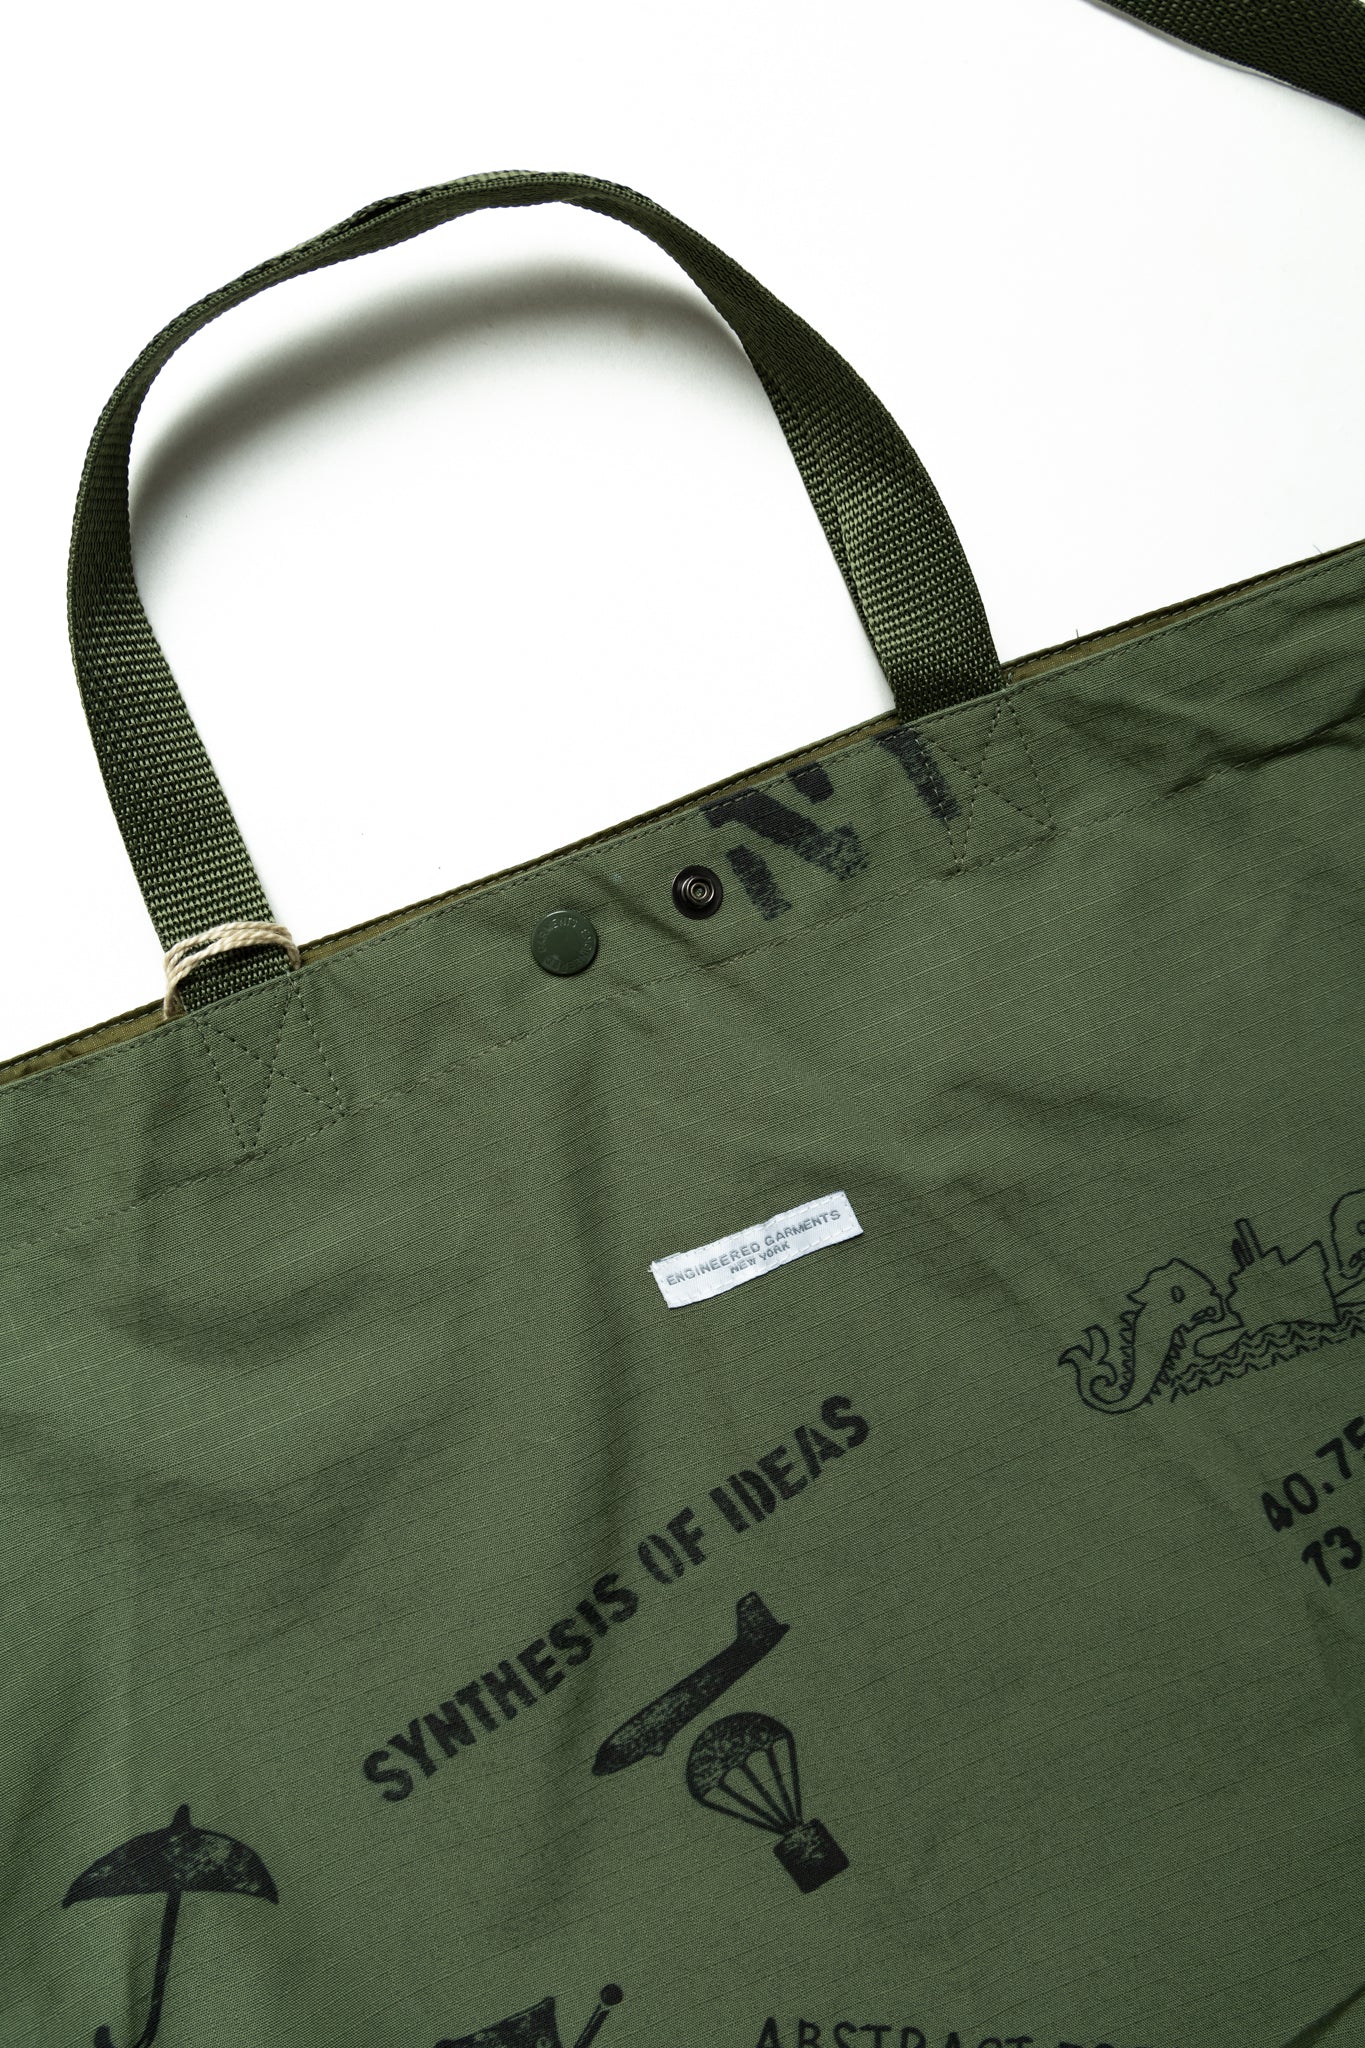 Carry All Tote Graffiti Print Ripstop - Olive